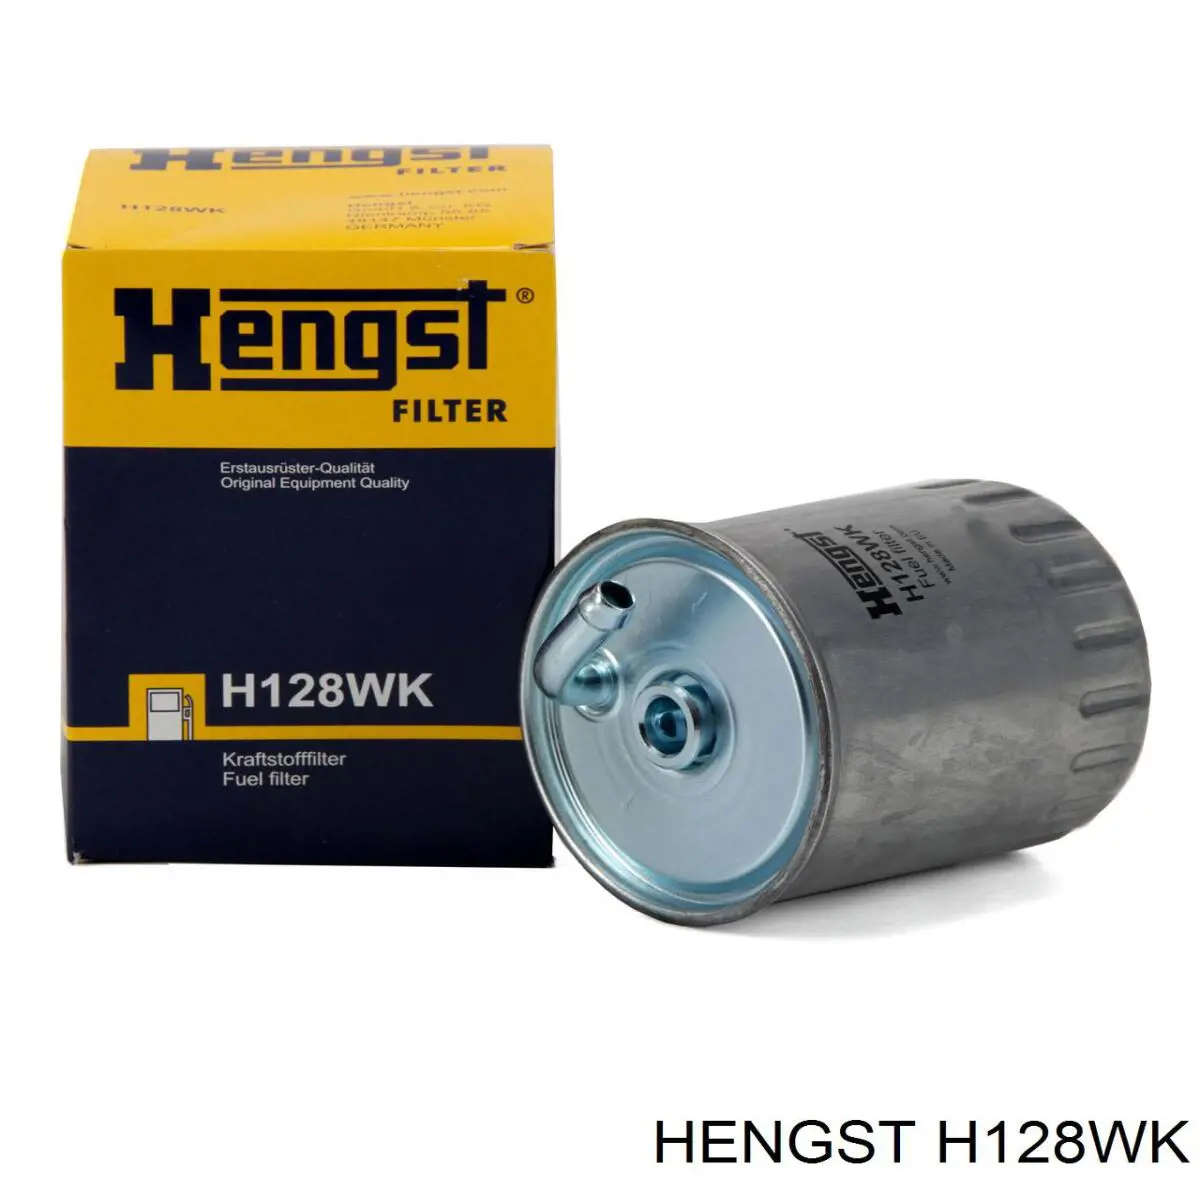 Filtro combustible H128WK Hengst